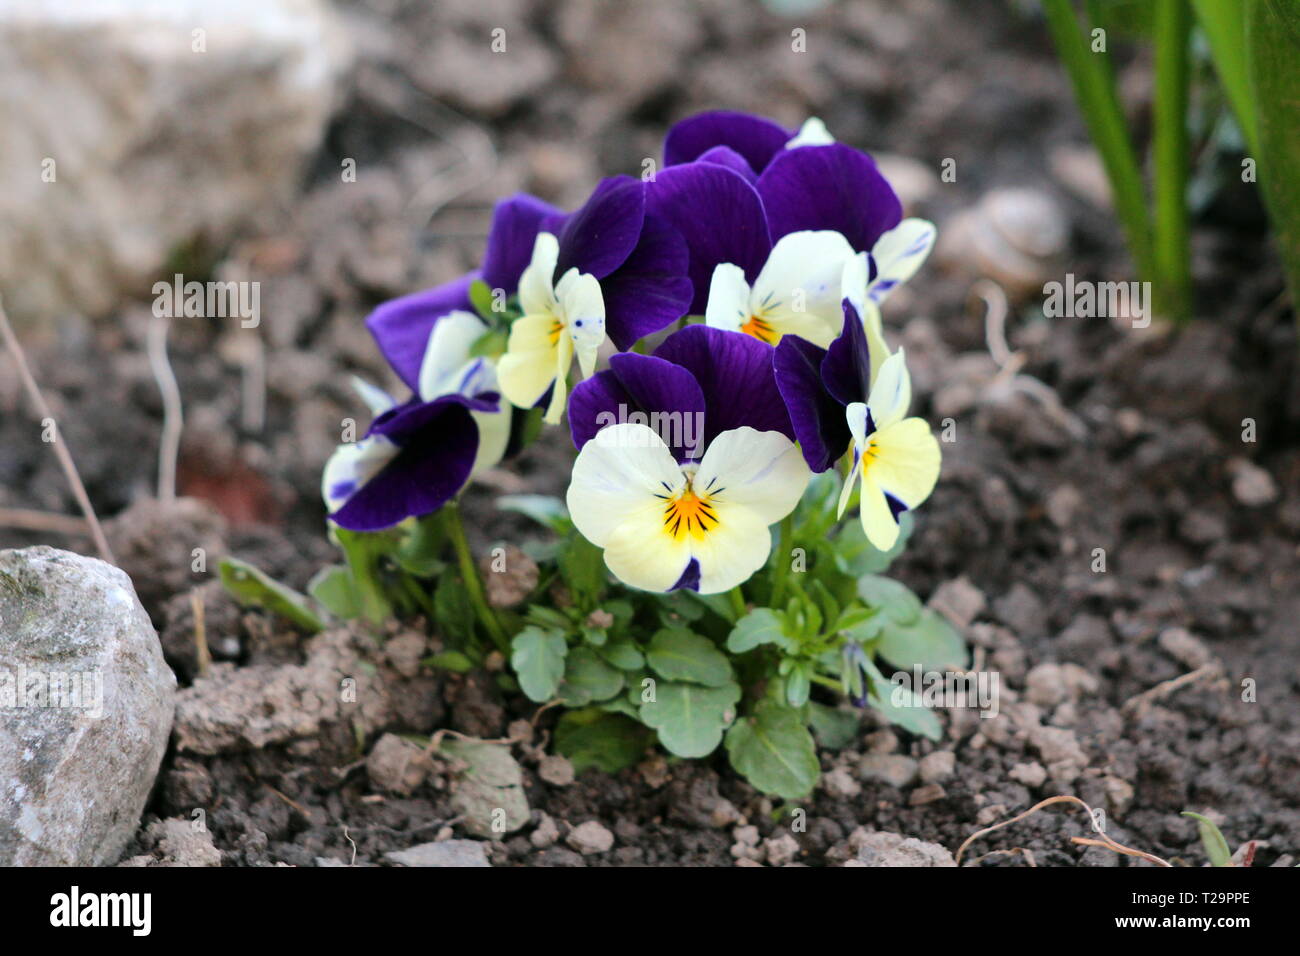 Wild pansy or Viola tricolor or Johnny jump up or Heartsease or Hearts ease or Hearts delight or Tickle my fancy or Jack jump up and kiss me Stock Photo